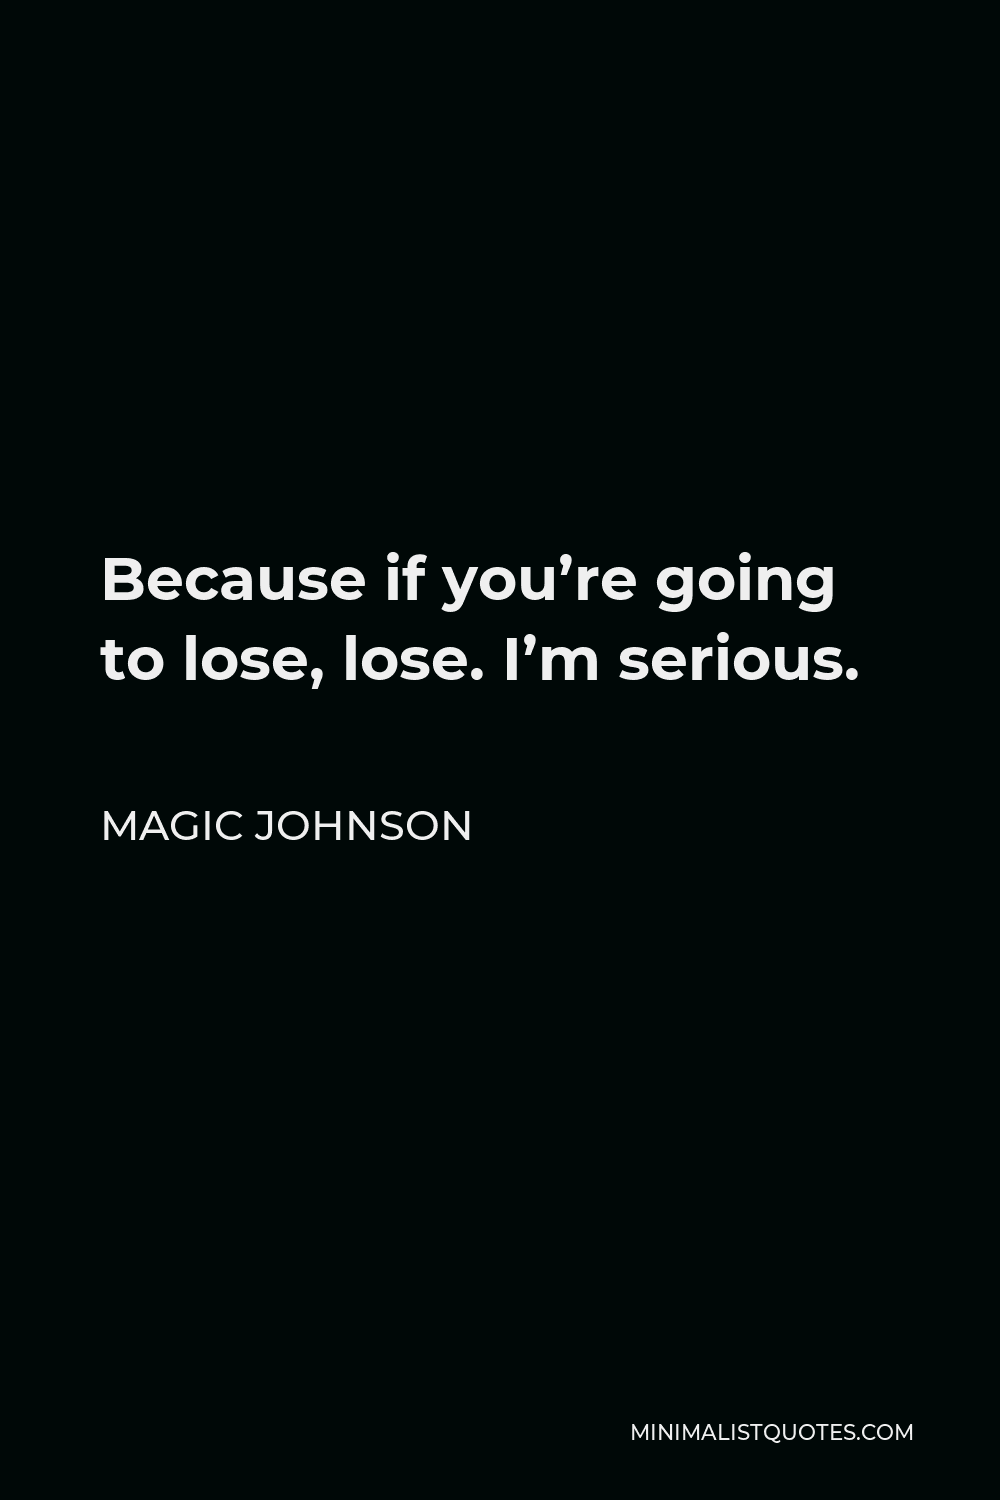 Magic Johnson Quote - Because if you’re going to lose, lose. I’m serious.